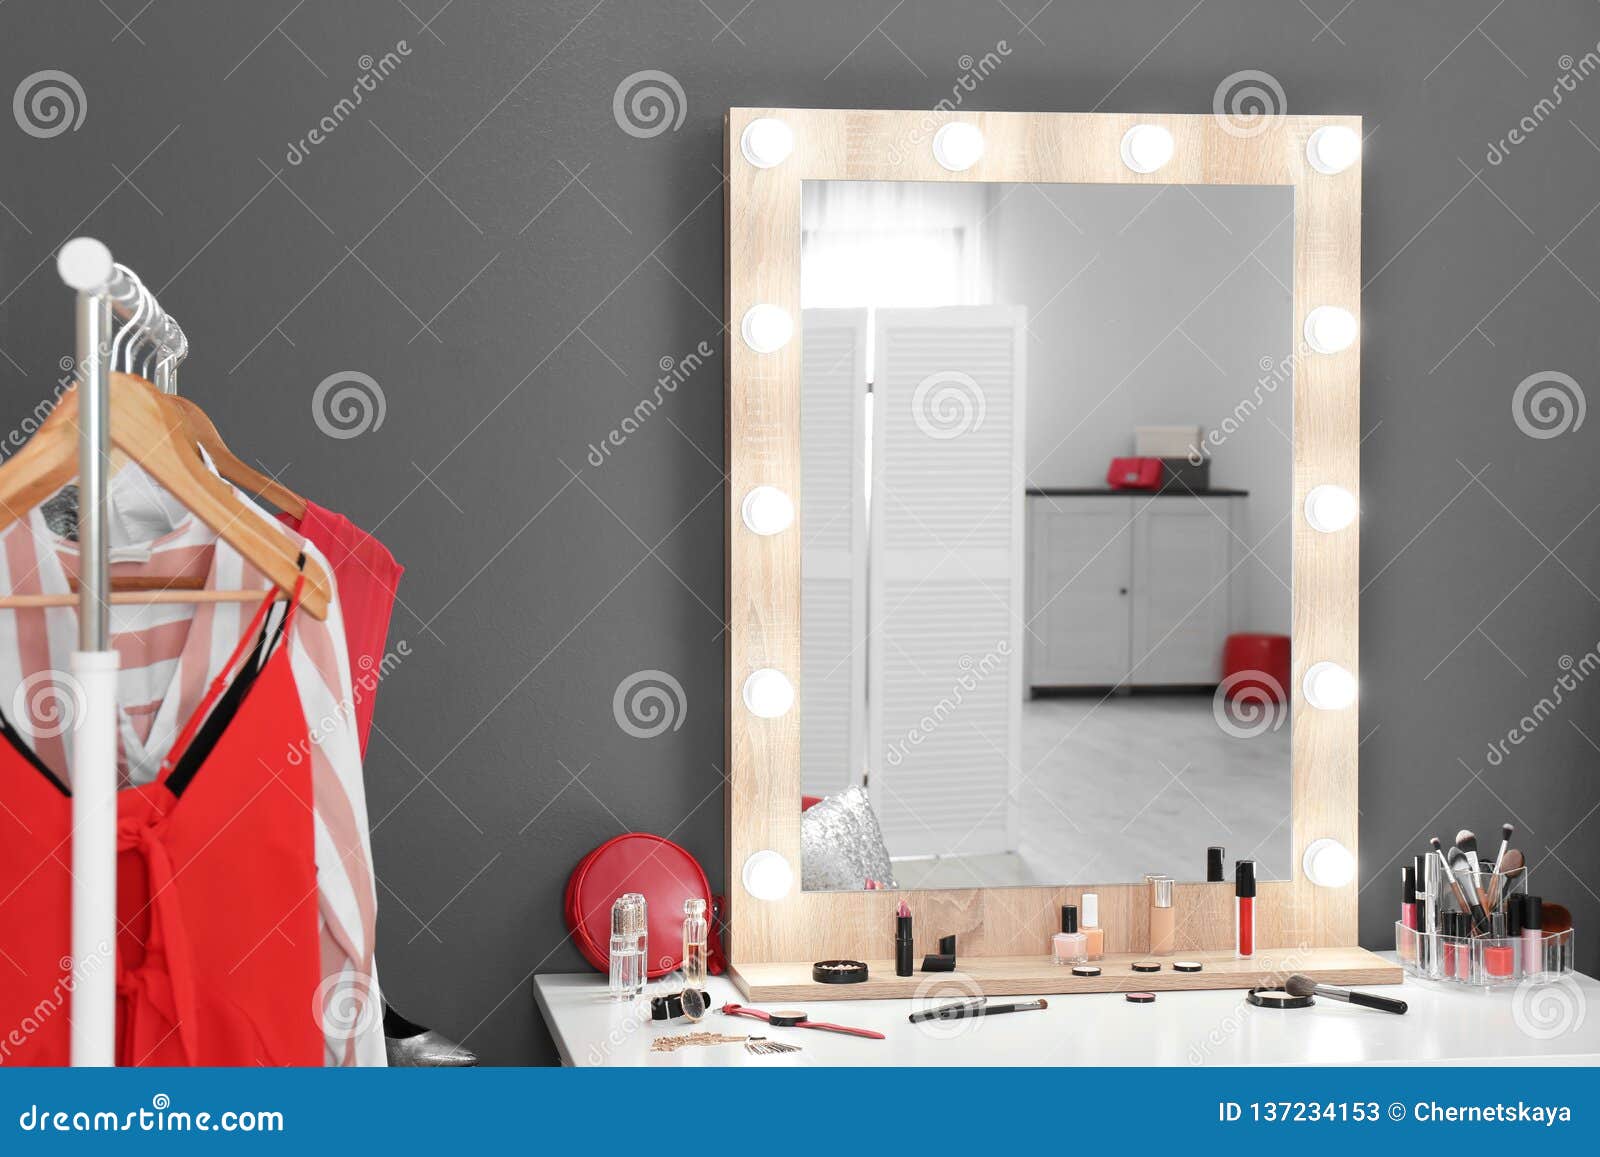 Stylish Room With Dressing Table Mirror Stock Image Image